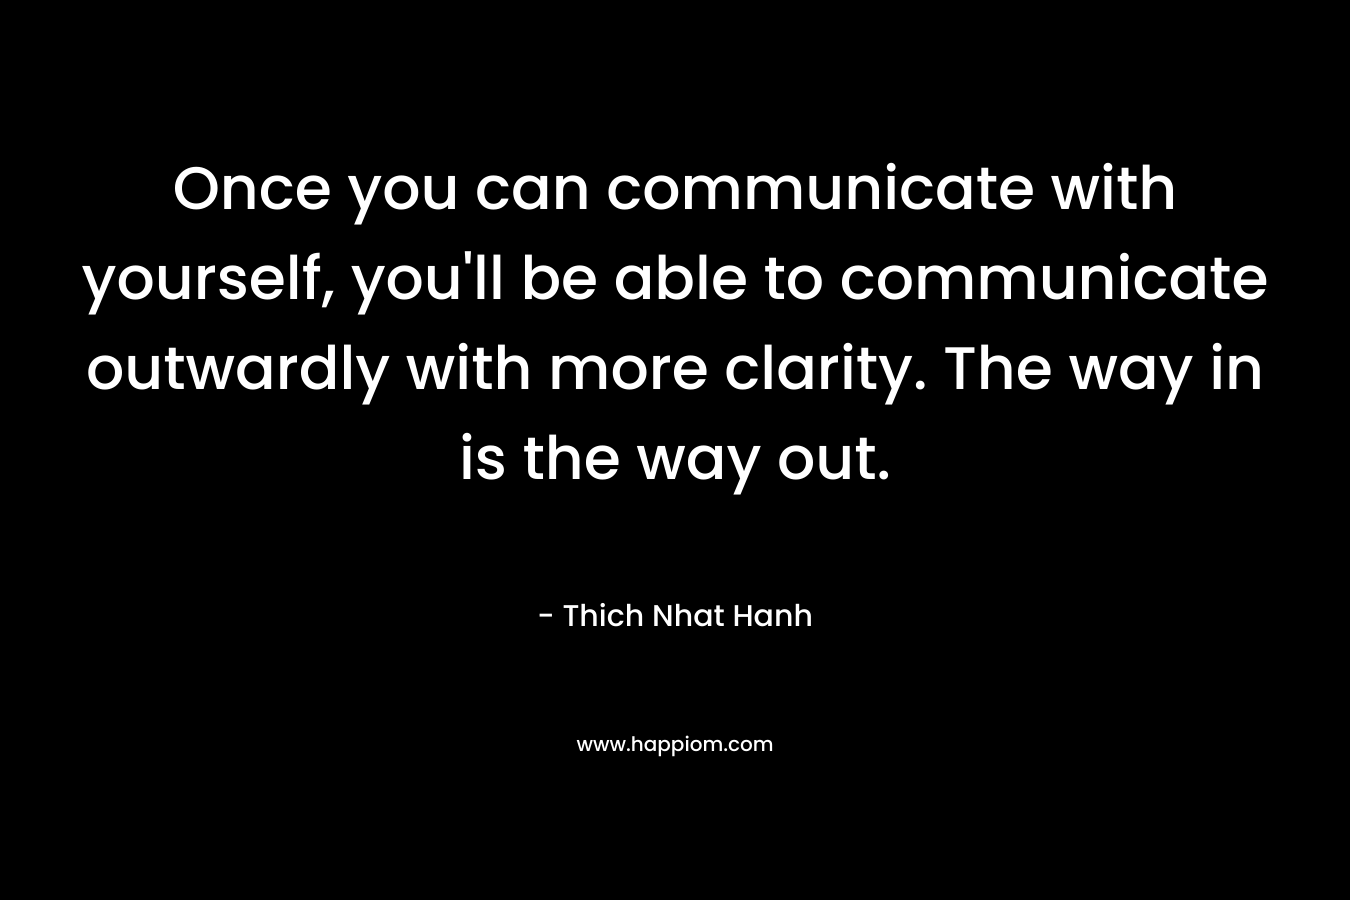 Once you can communicate with yourself, you'll be able to communicate outwardly with more clarity. The way in is the way out.